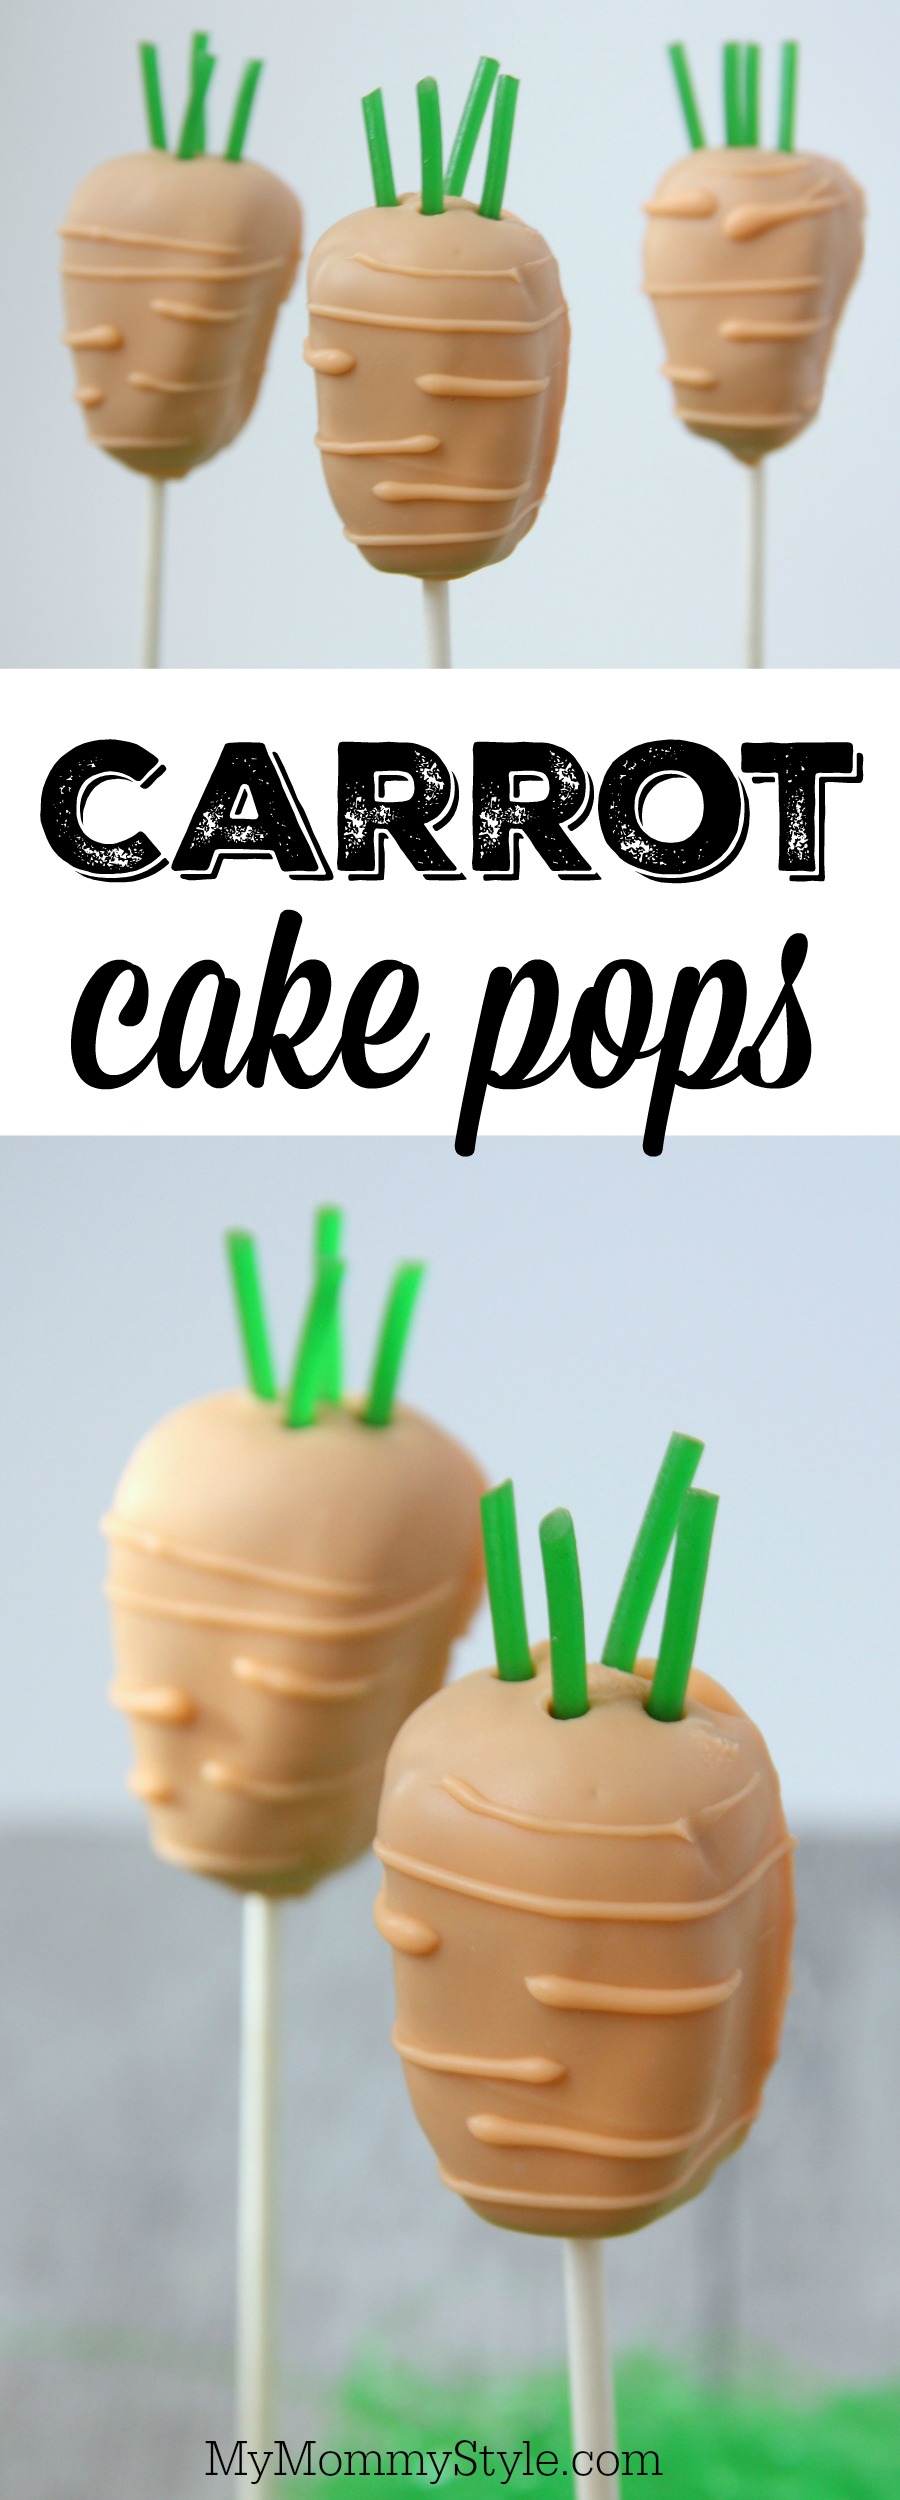 Carrot Cake pops - My Mommy Style